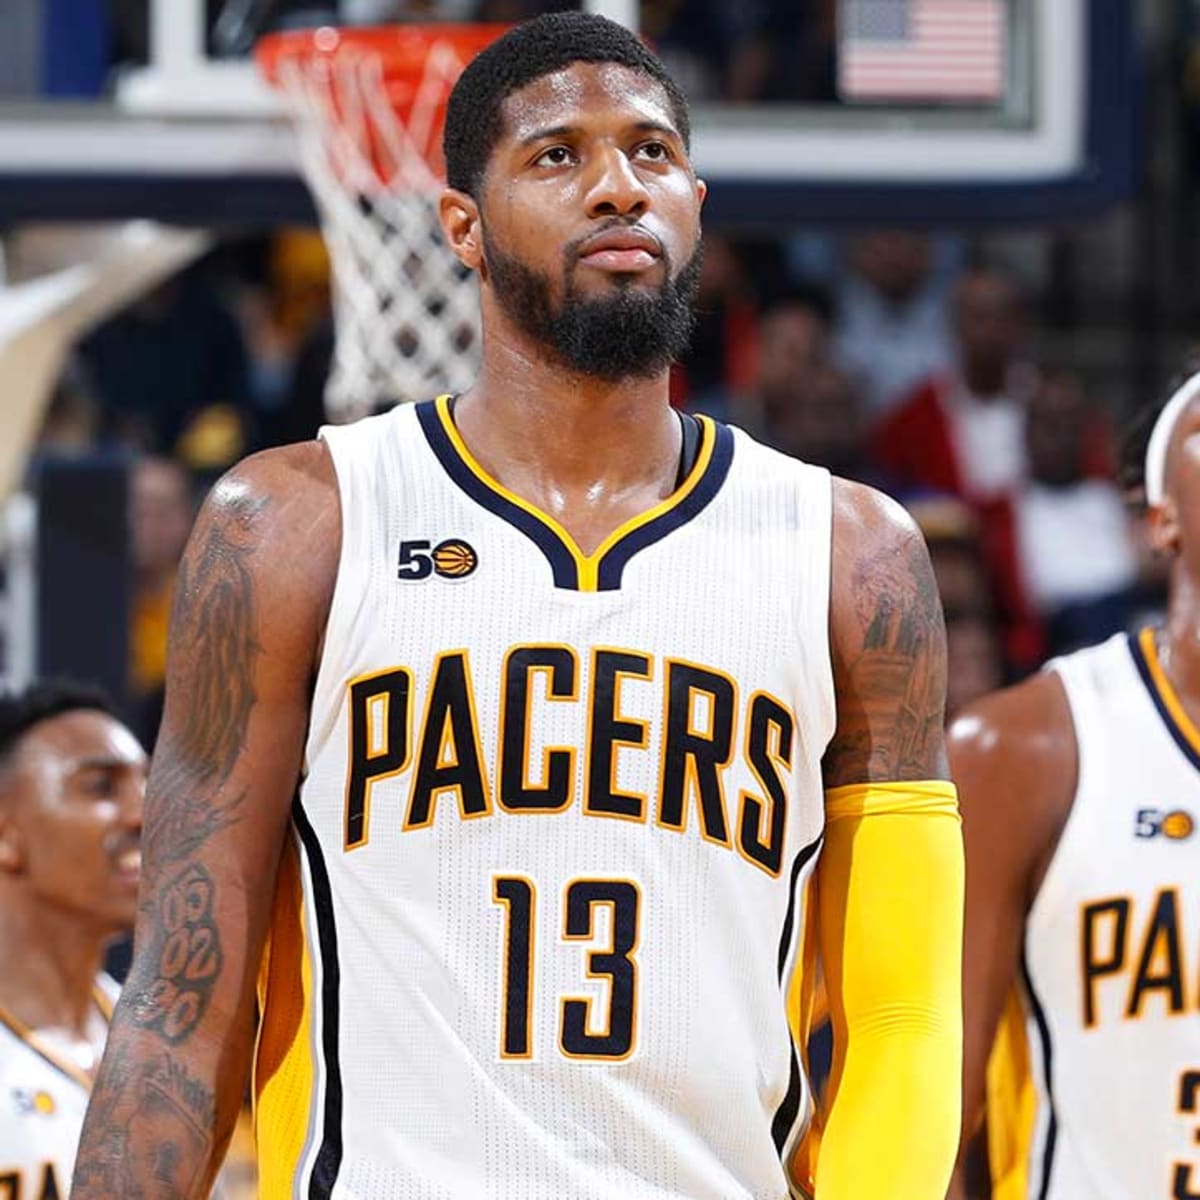 Pacers' Paul George changing jersey number from 24 to 13